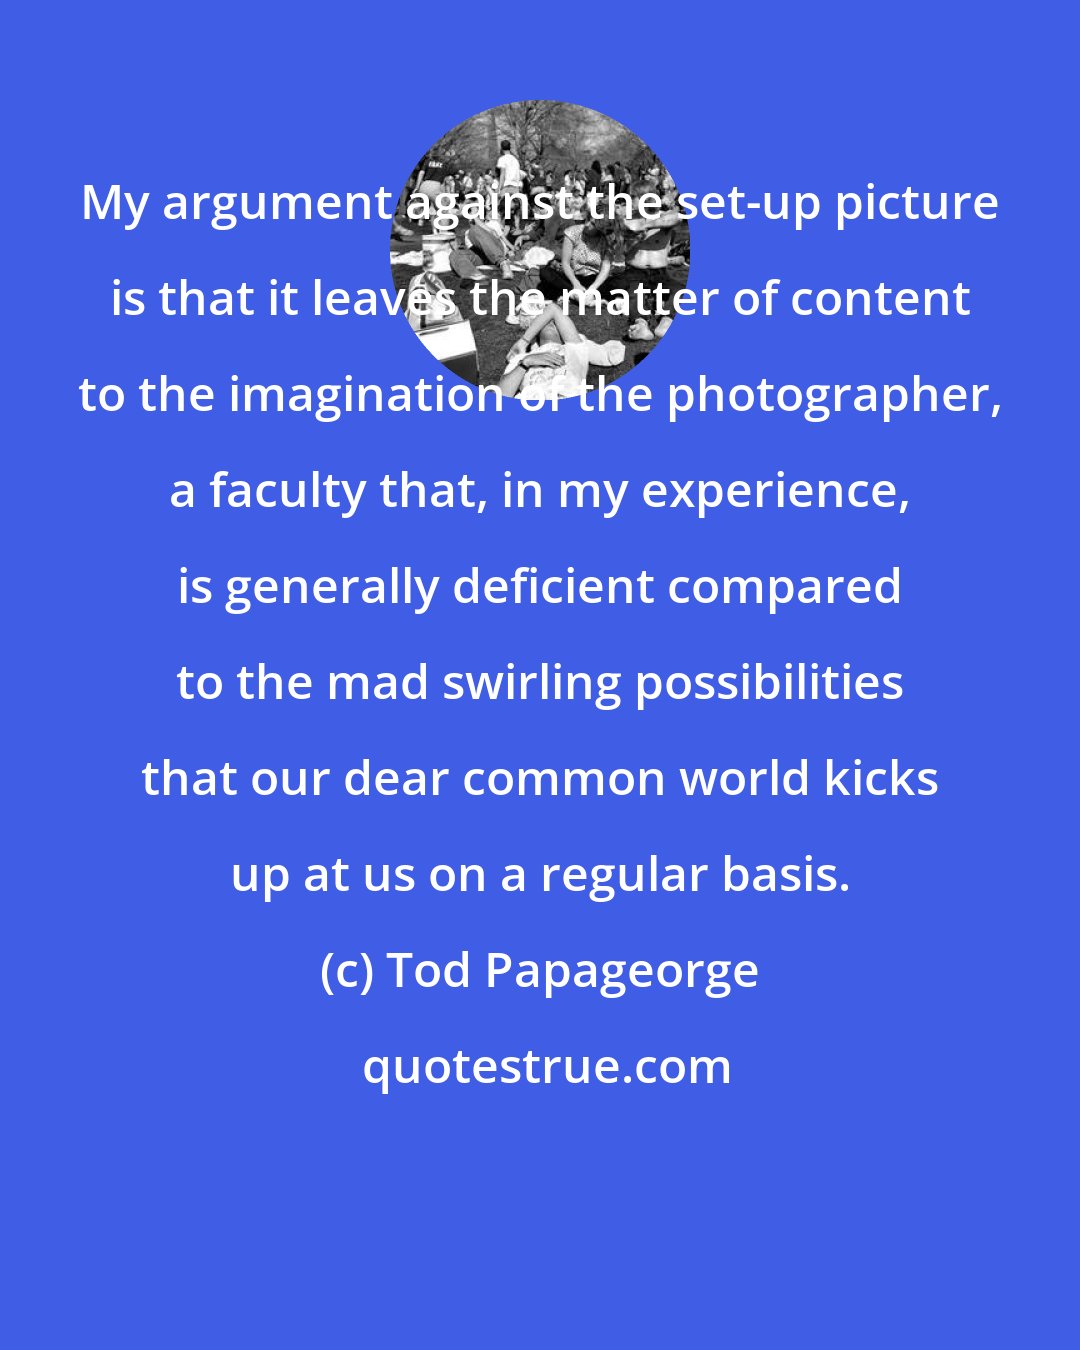 Tod Papageorge: My argument against the set-up picture is that it leaves the matter of content to the imagination of the photographer, a faculty that, in my experience, is generally deficient compared to the mad swirling possibilities that our dear common world kicks up at us on a regular basis.